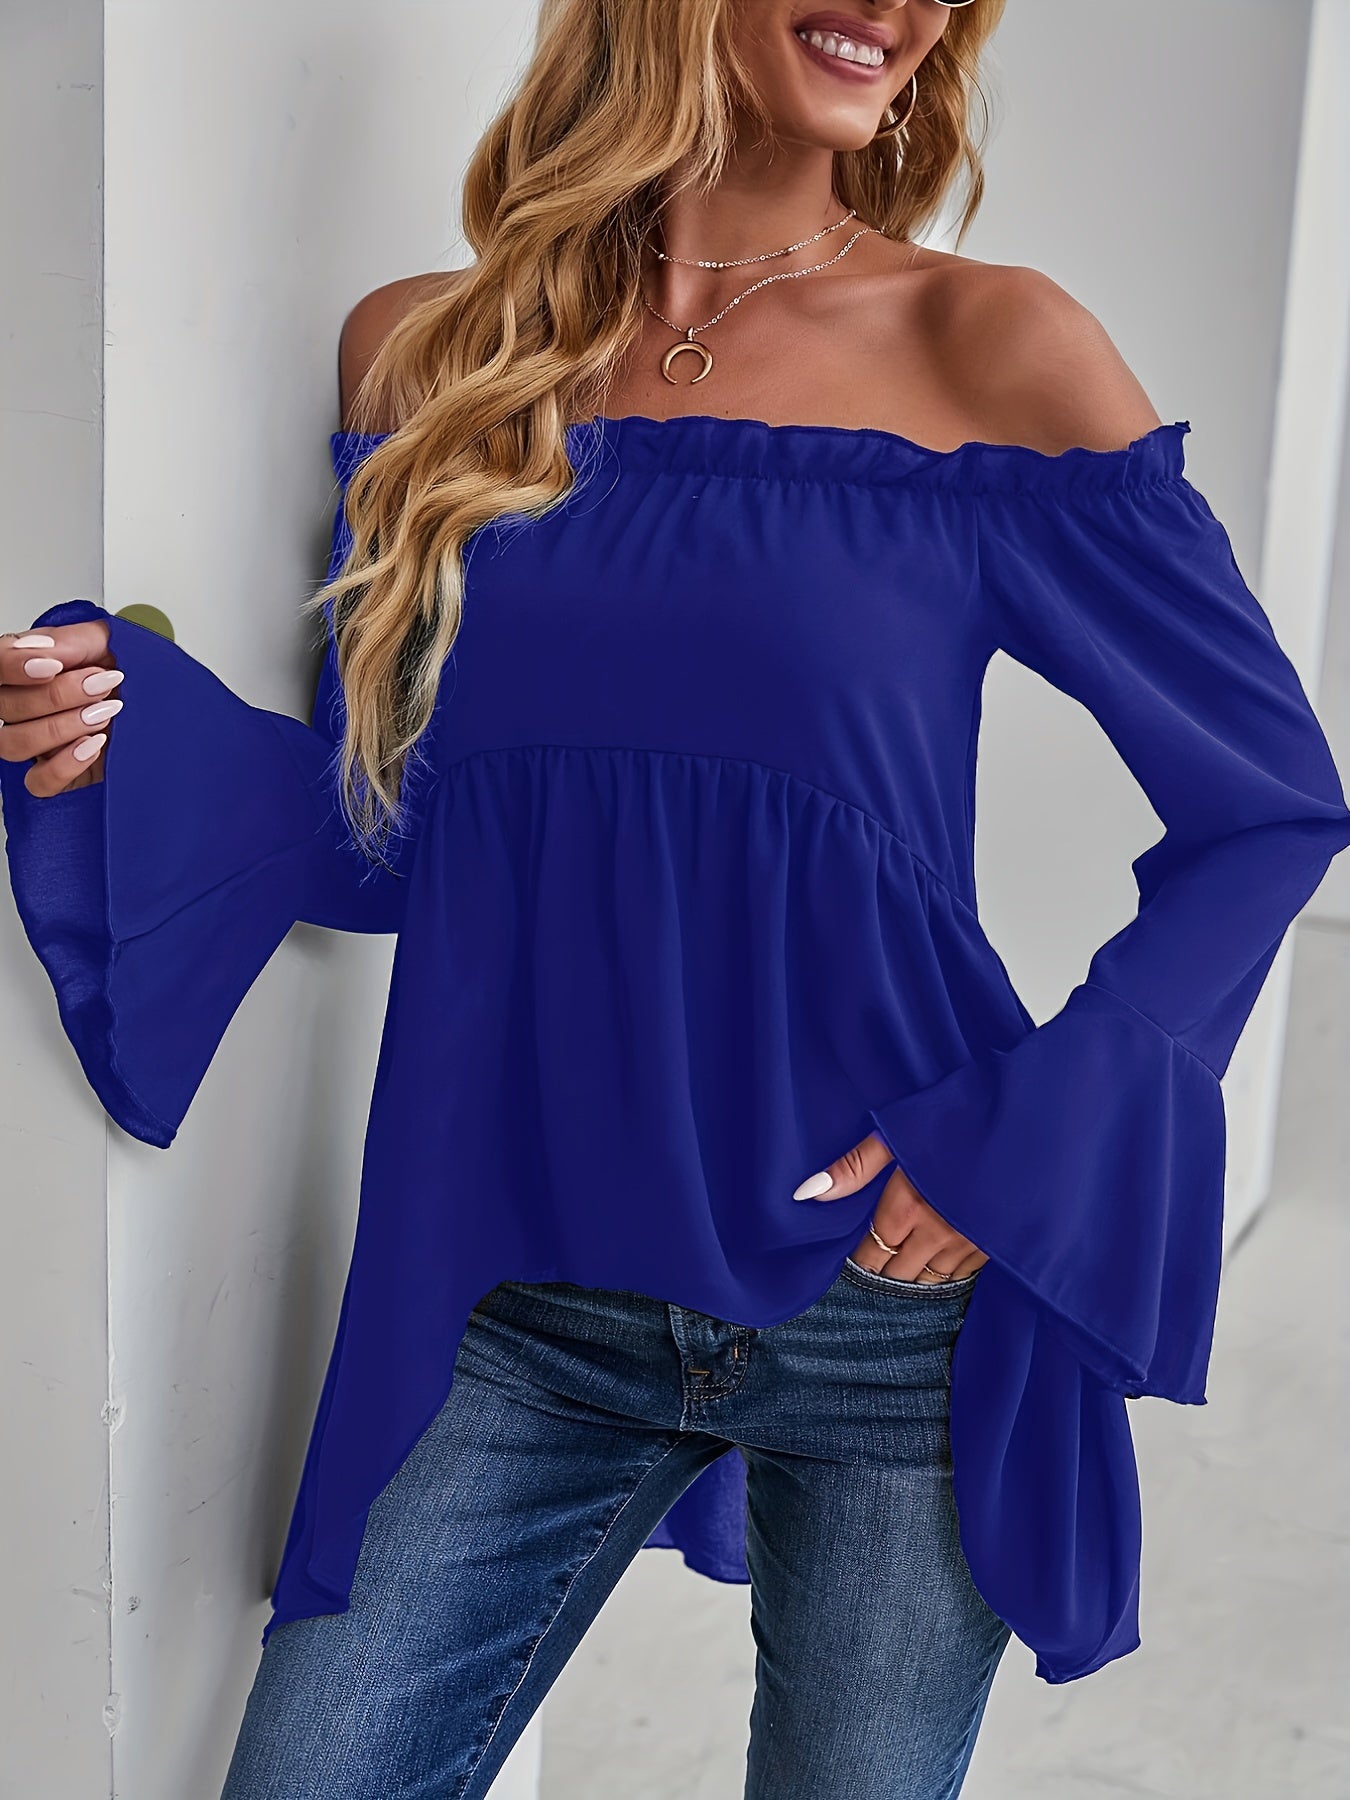 vlovelaw  Dipped Hem Ruffle Trim Blouse, Casual Off Shoulder Solid Long Sleeve Blouse, Women's Clothing